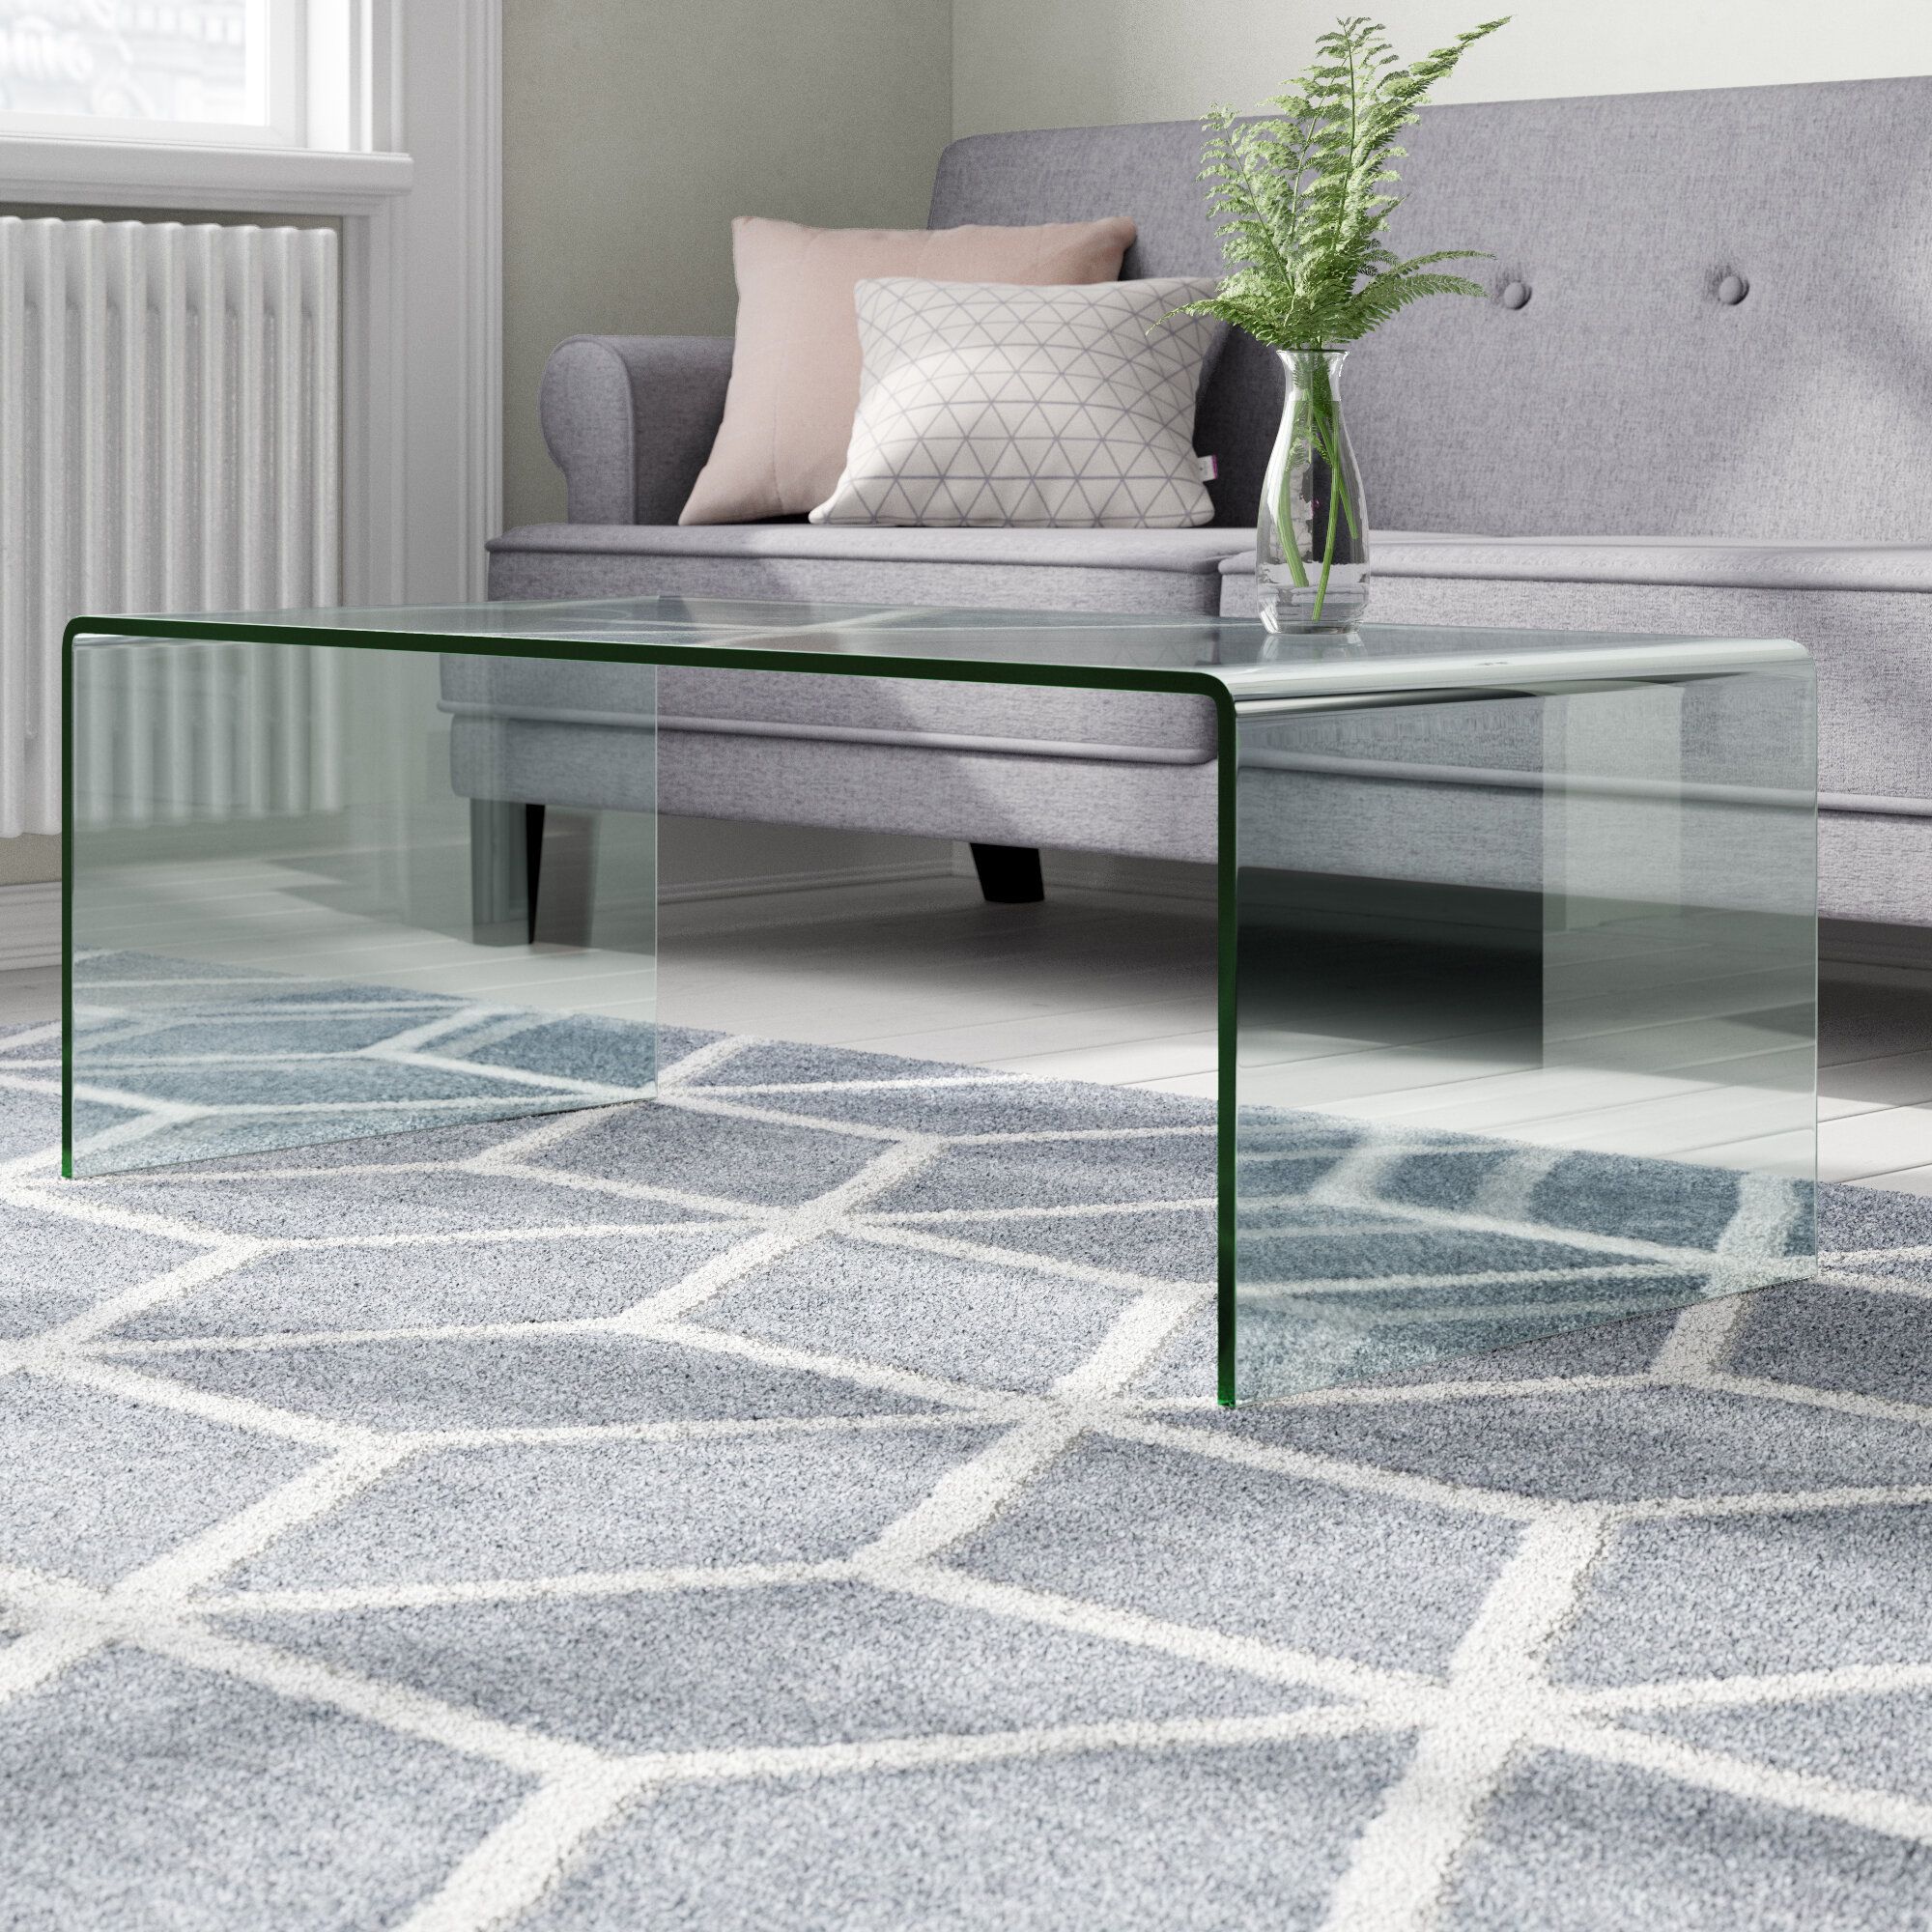 Metro Lane Curved Clear Glass Coffee Table & Reviews | Wayfair.co (View 7 of 20)